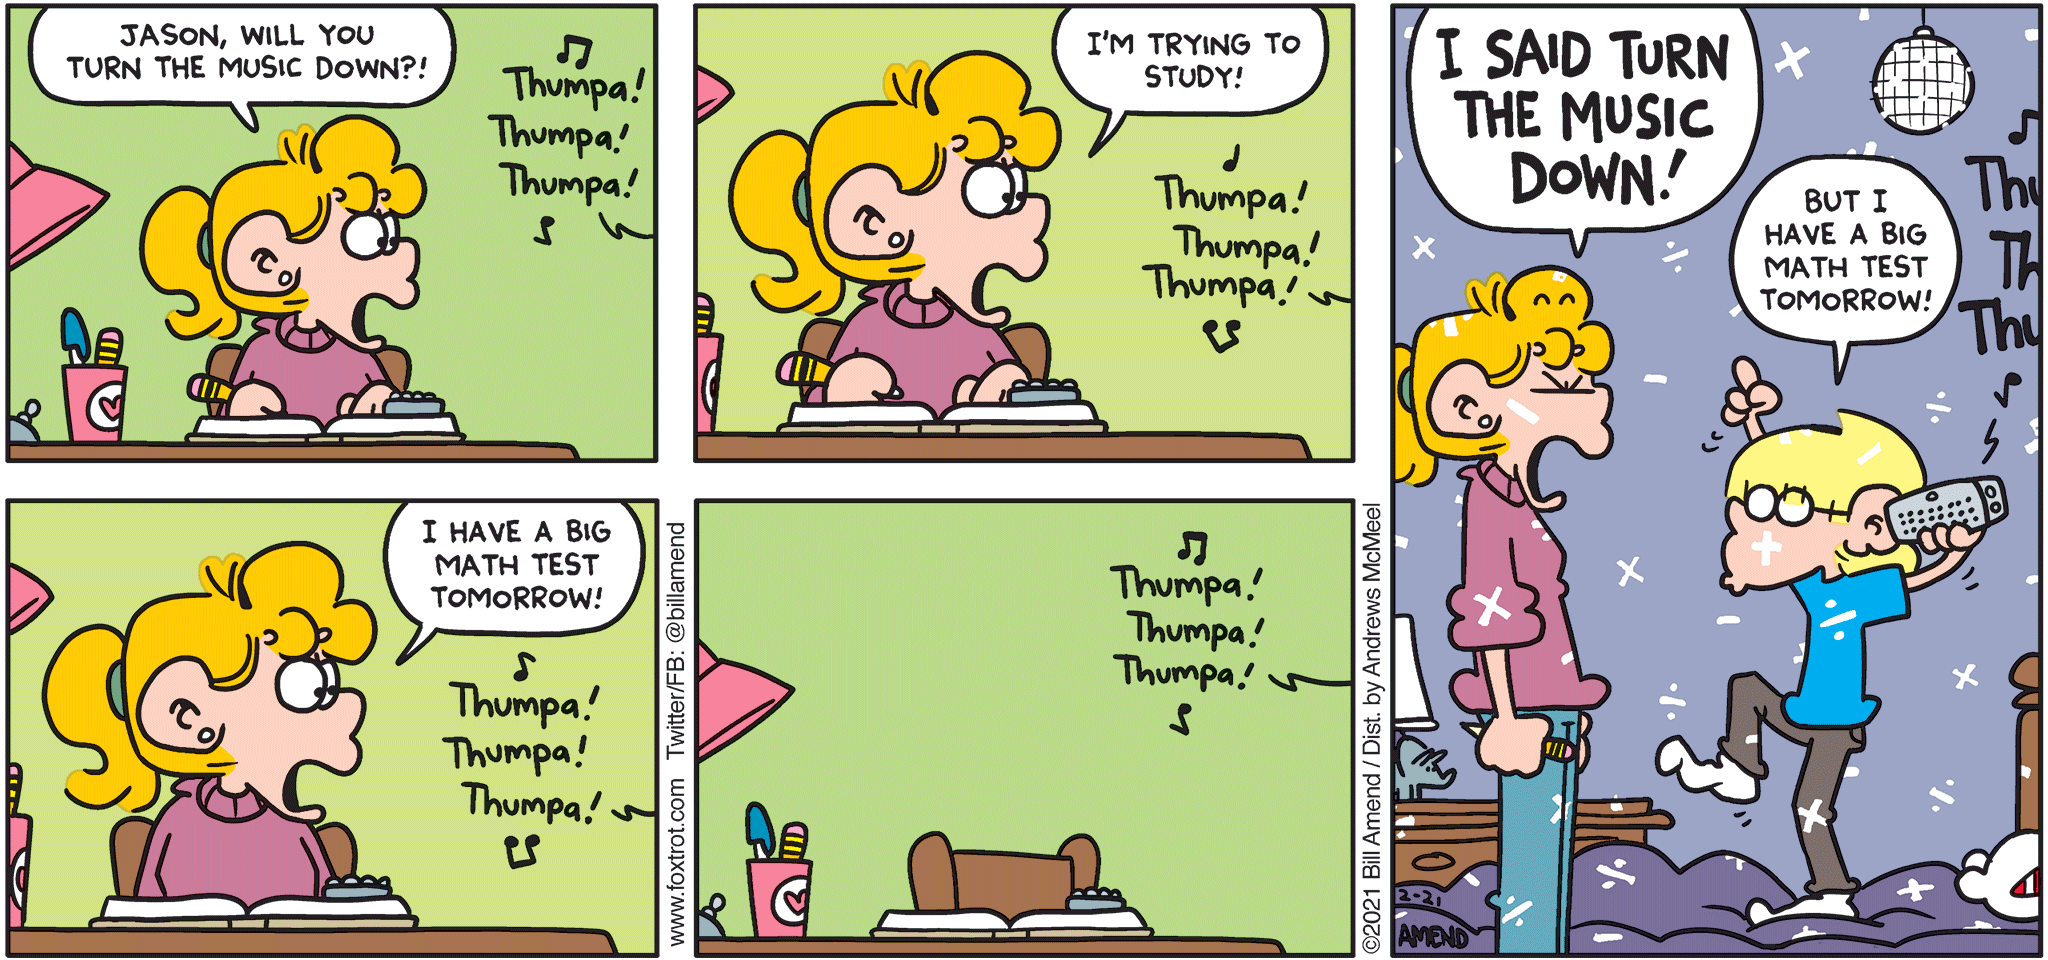 FoxTrot comic strip by Bill Amend - "Party Time" published February 21, 2021 - Paige Fox: Jason, will you turn the music down?! I'm trying to study! I have a big math test tomorrow! I SAID TURN THE MUSIC DOWN! Jason Fox: But I have a big math test tomorrow!